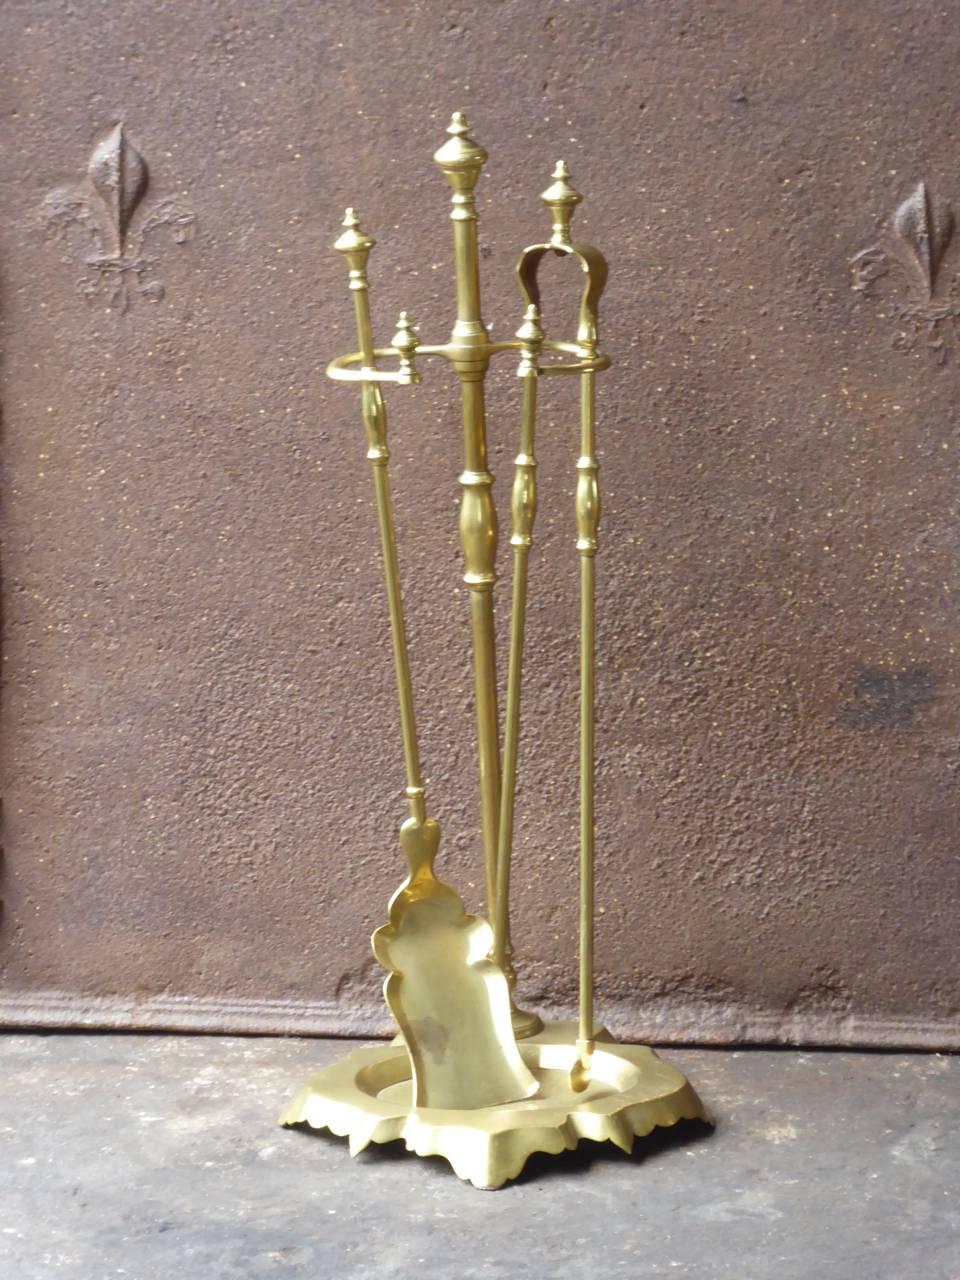 19th century French fireplace tool set, fire companion set made of polished brass. The tool set is made by Grandry Fils.

We have a unique and specialized collection of antique and used fireplace accessories consisting of more than 1000 listings at